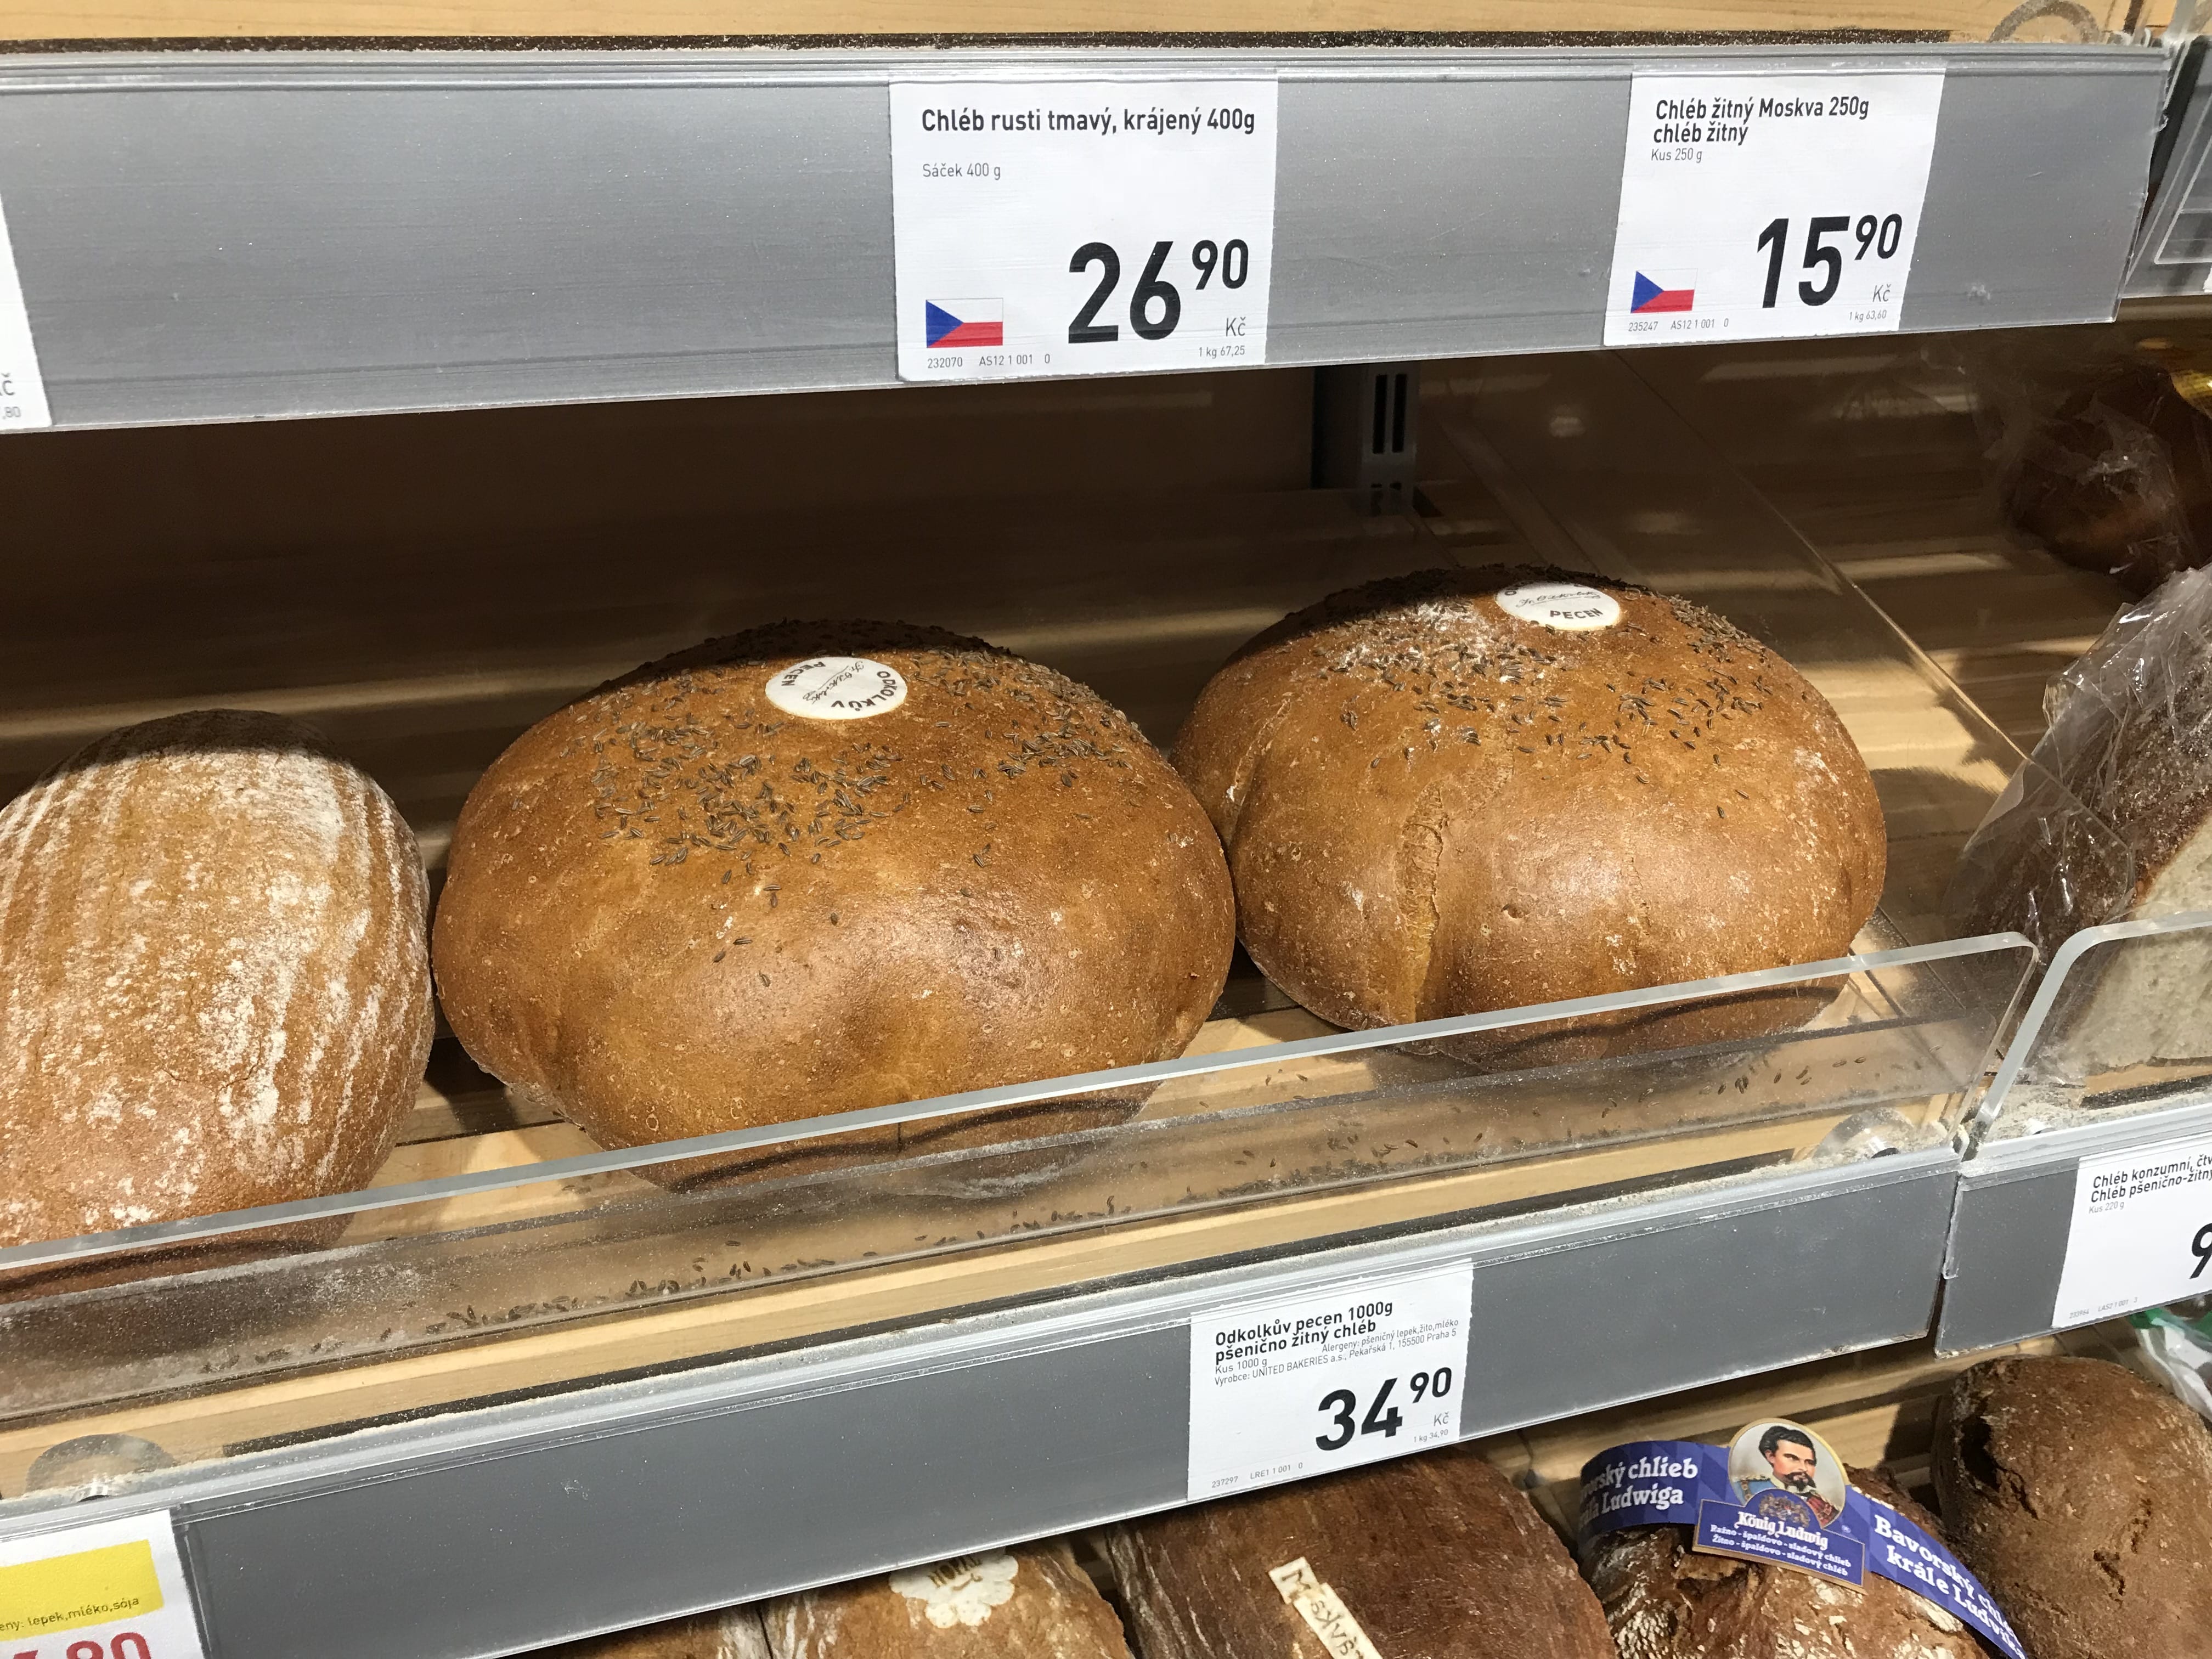 bread with an edible label on the shelf can't be missed